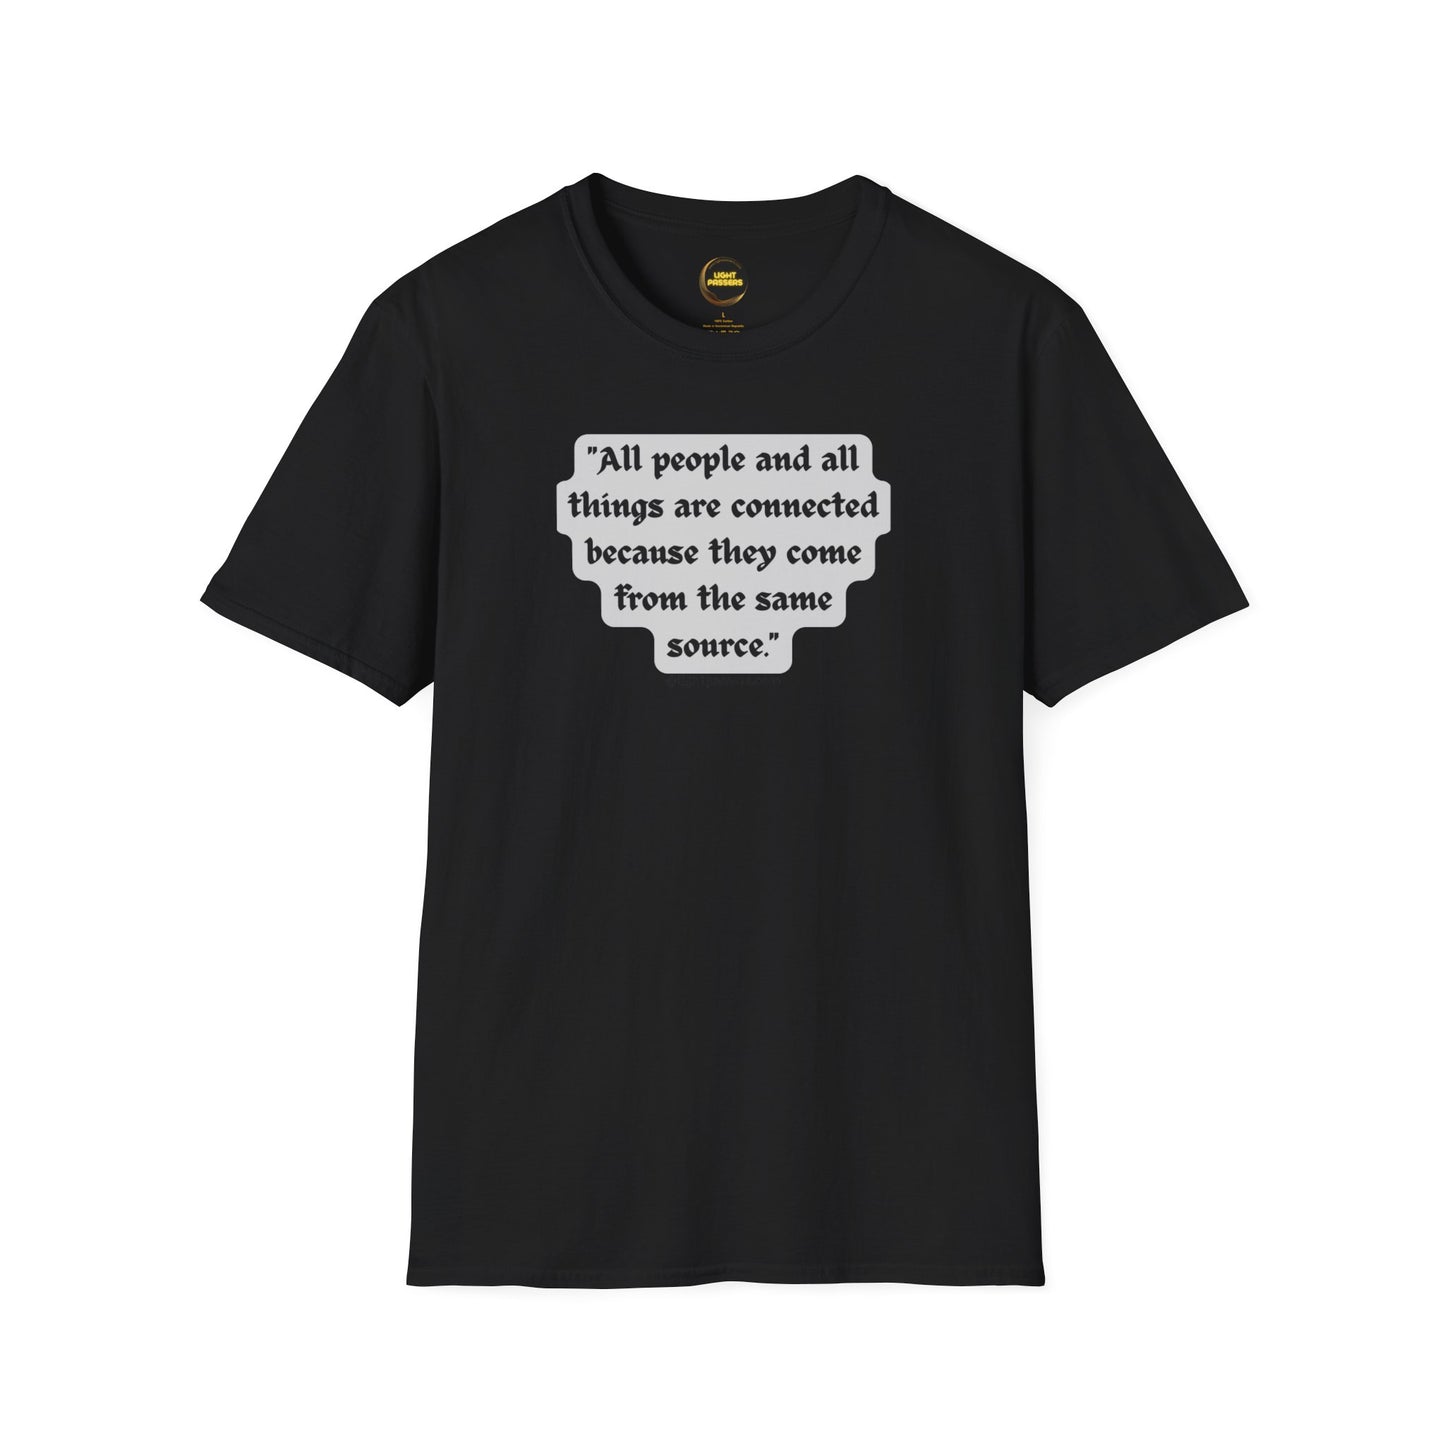 Light Passers Marketplace All People and Things are Connected in yellow Unisex Soft Cotton  T-shirt Inspirational Messages, Diversity, Simple Messages, Mental Health